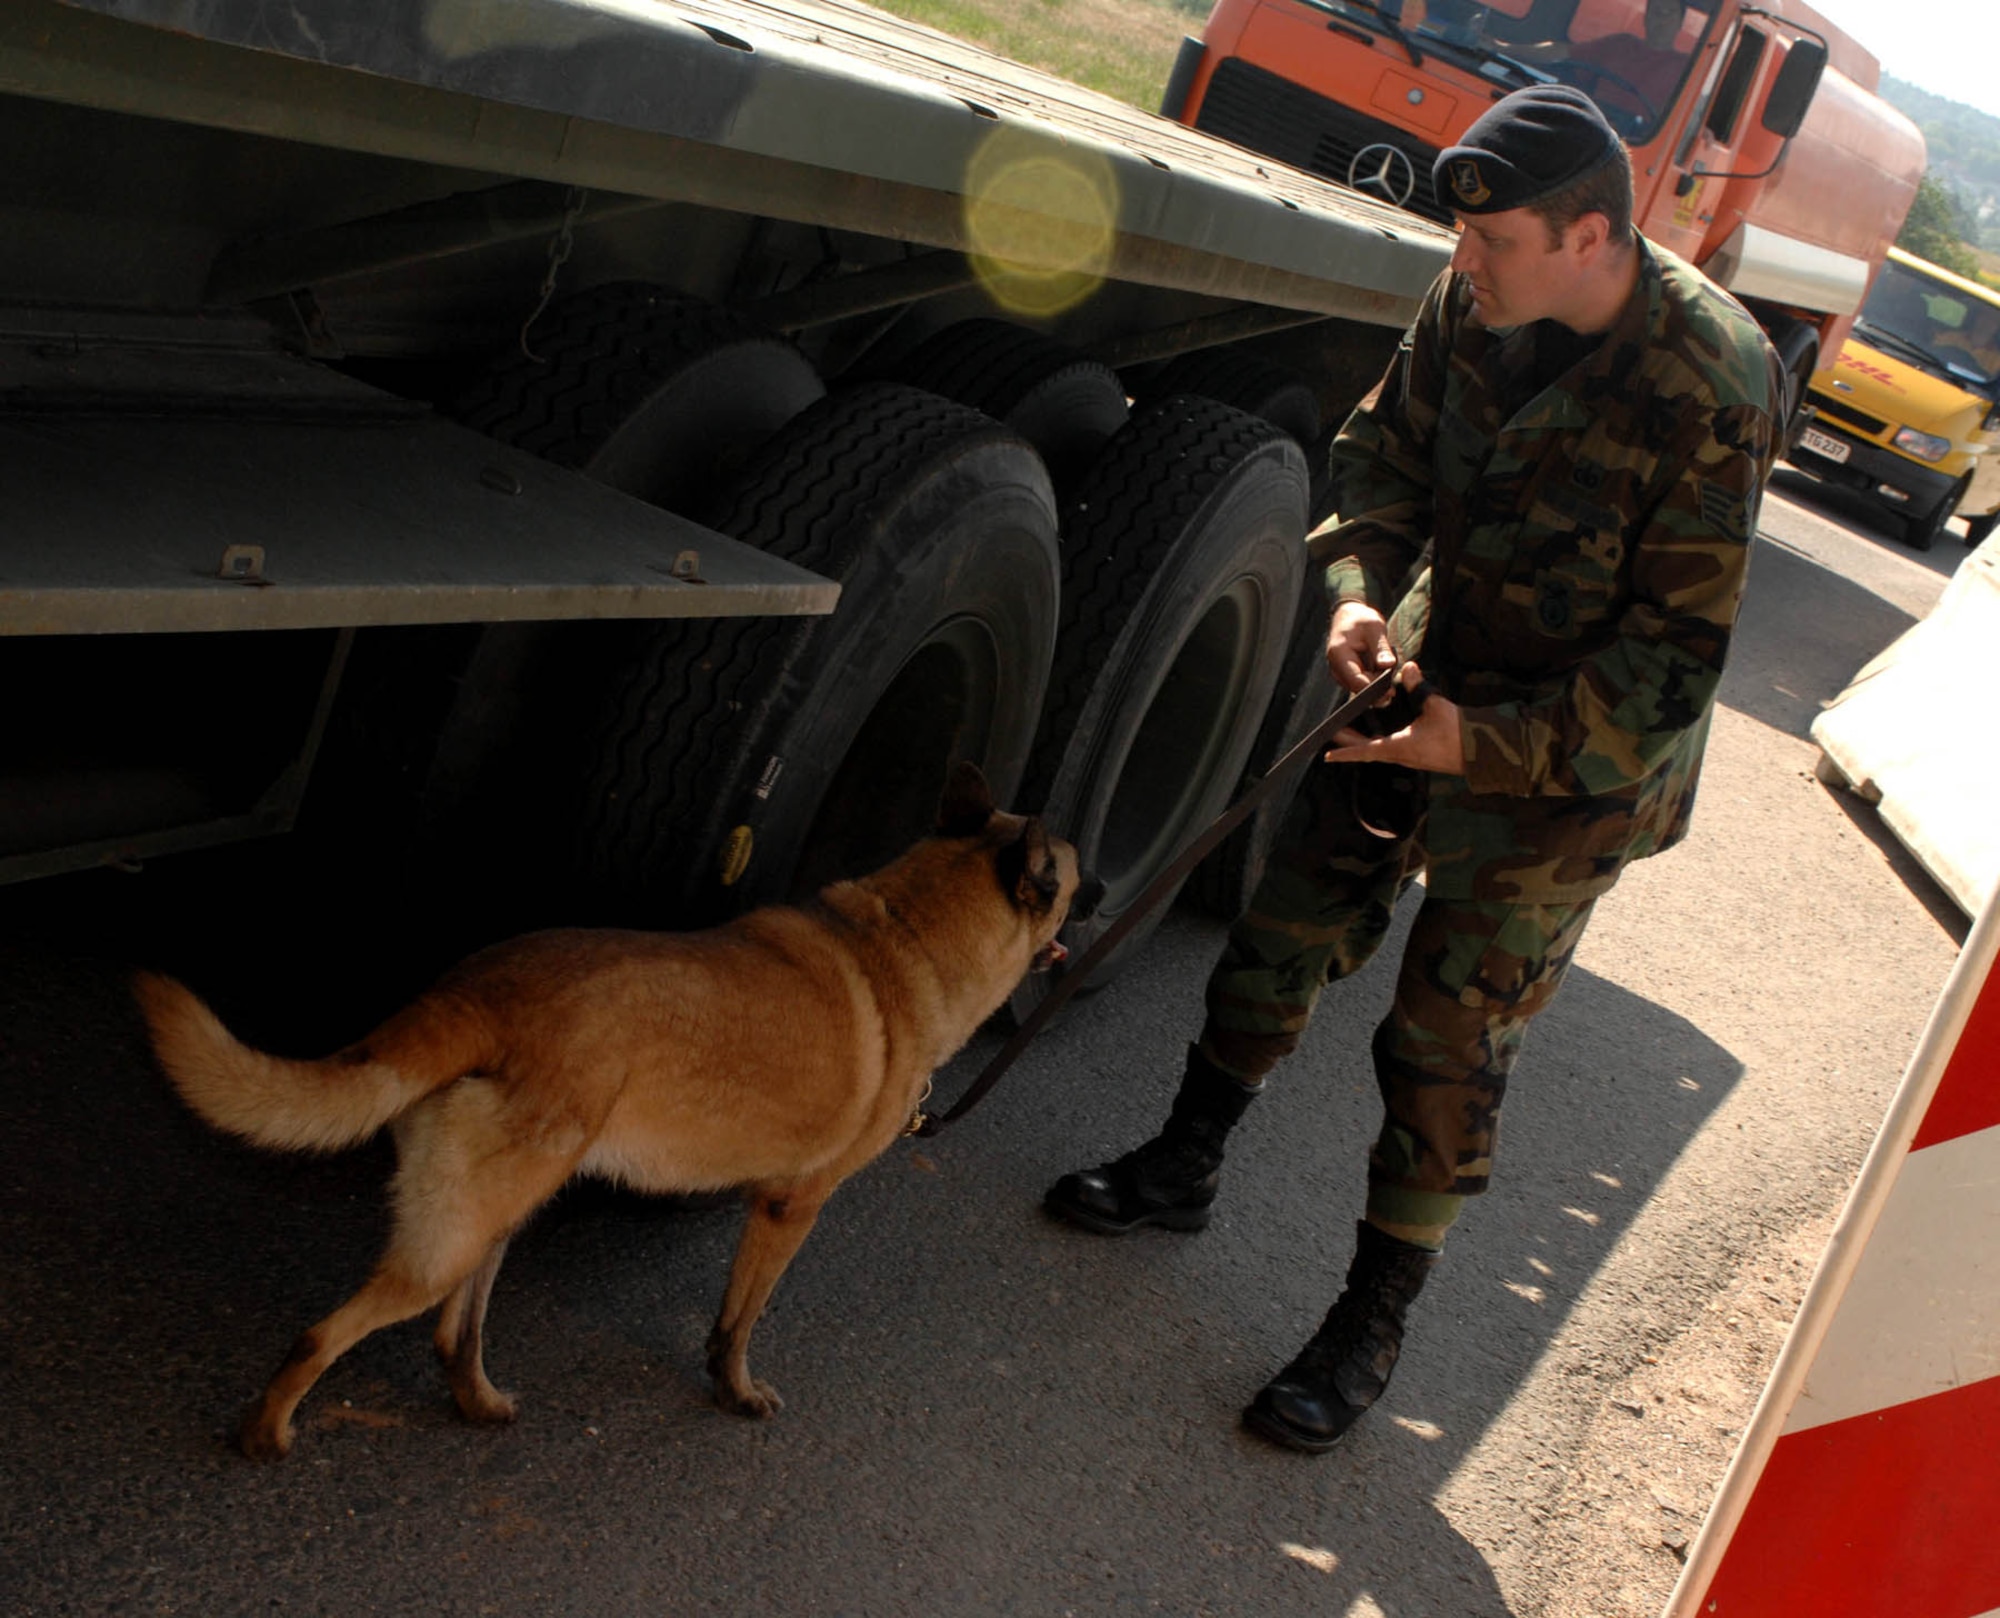 SPANGDAHLEM AIR BASE, GERMANY -- Staff Sgt. Eric Brown, 52nd Security Forces military working dog handler, searches a contracting vehicle with Laika his Belgian Malinois MWD here May 22, 2007. (U.S. Air Force photo/Airman 1st Class Stephanie Clark) 